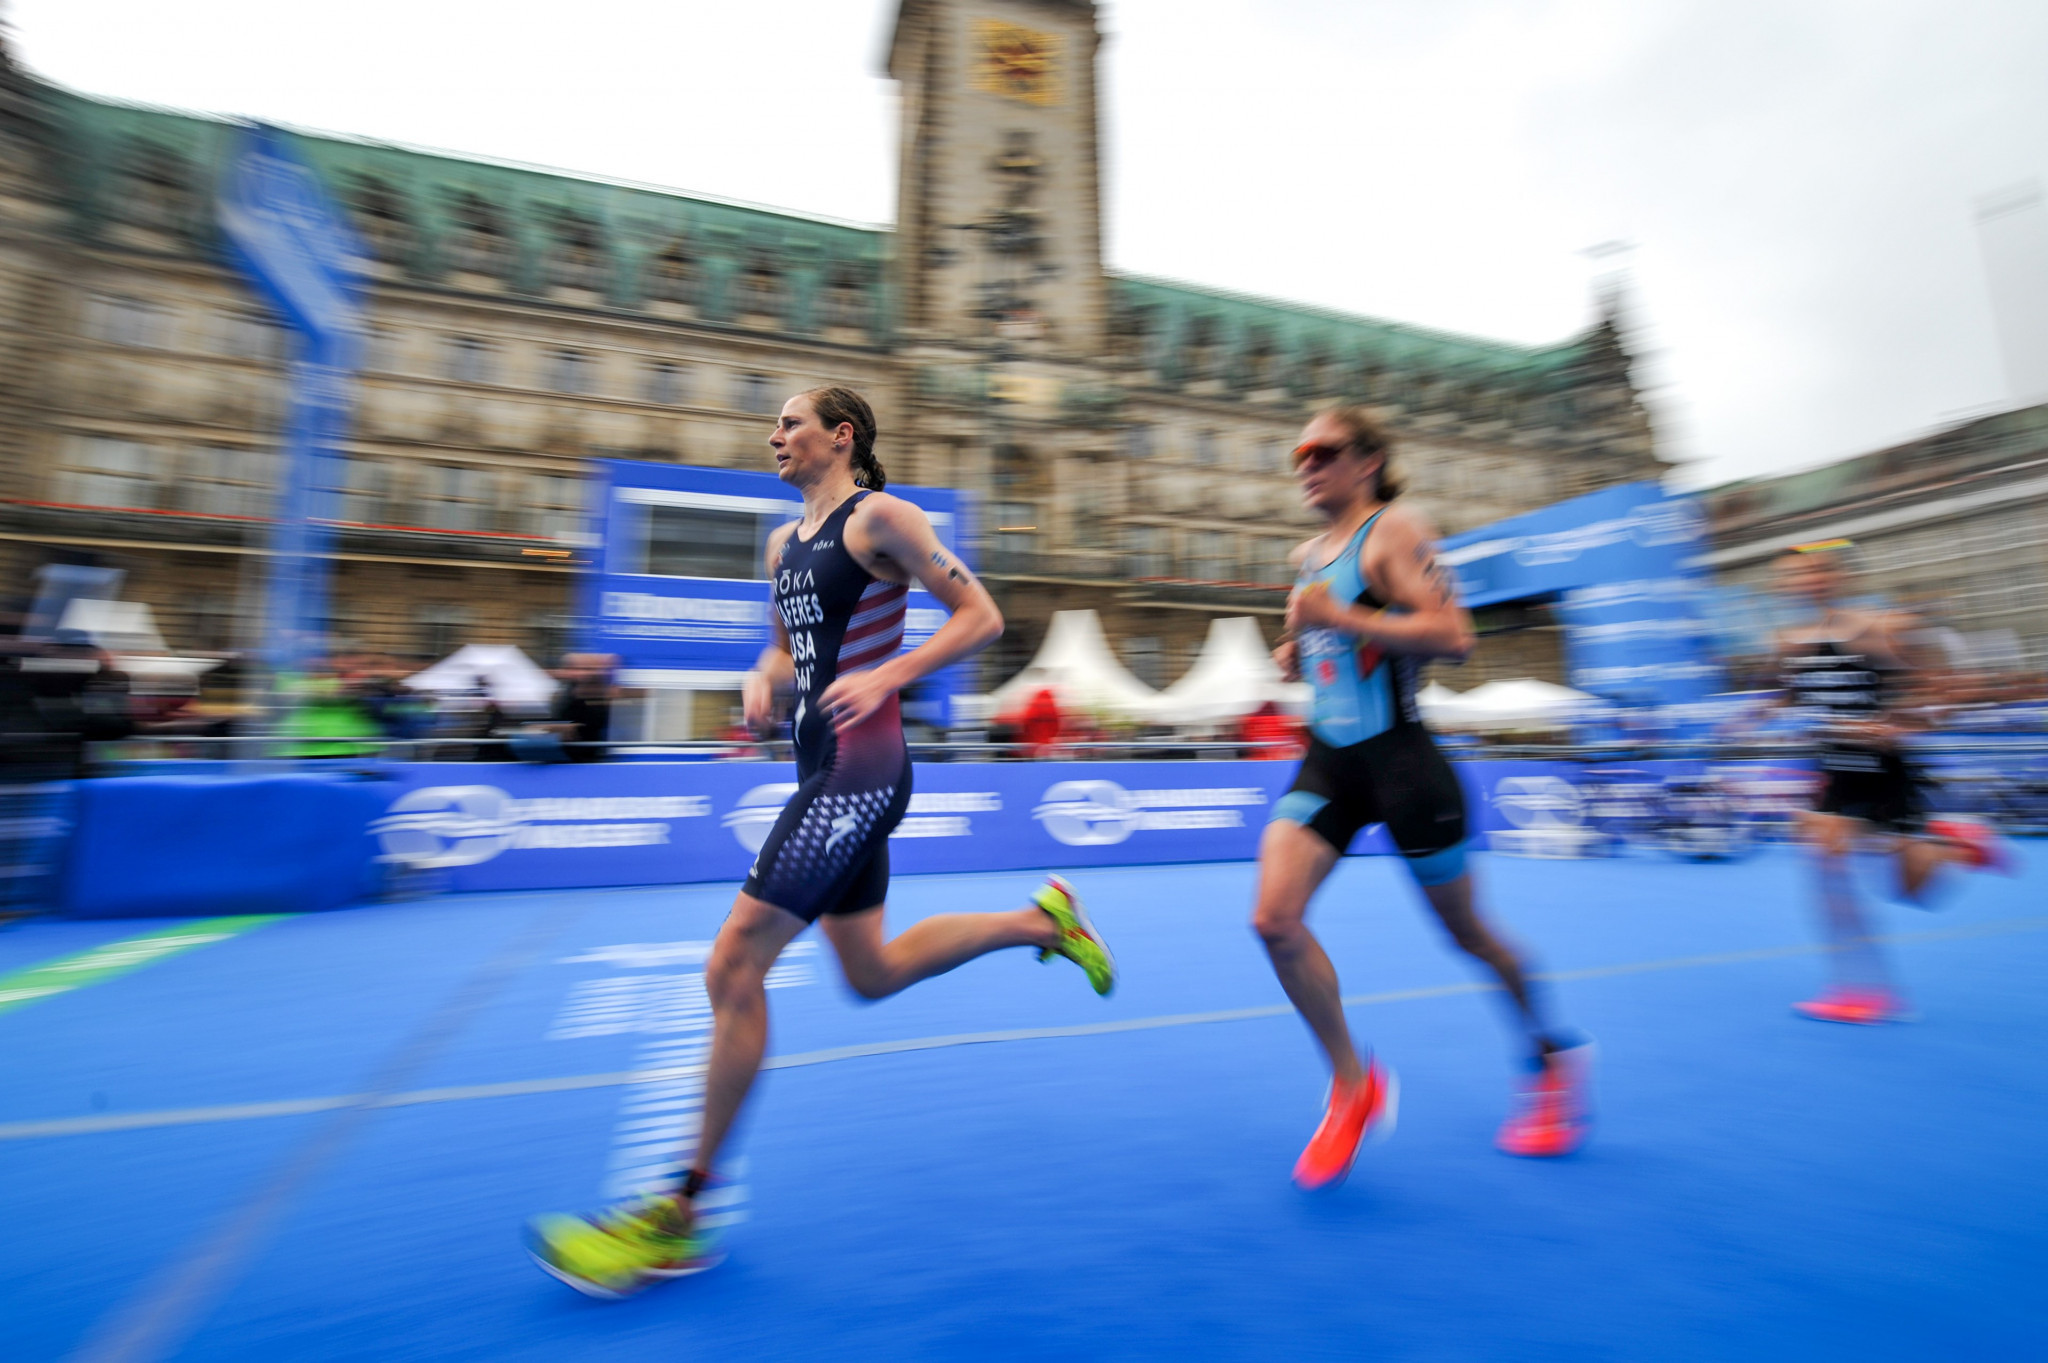 World Triathlon has announced changes to its calendar ©Getty Images